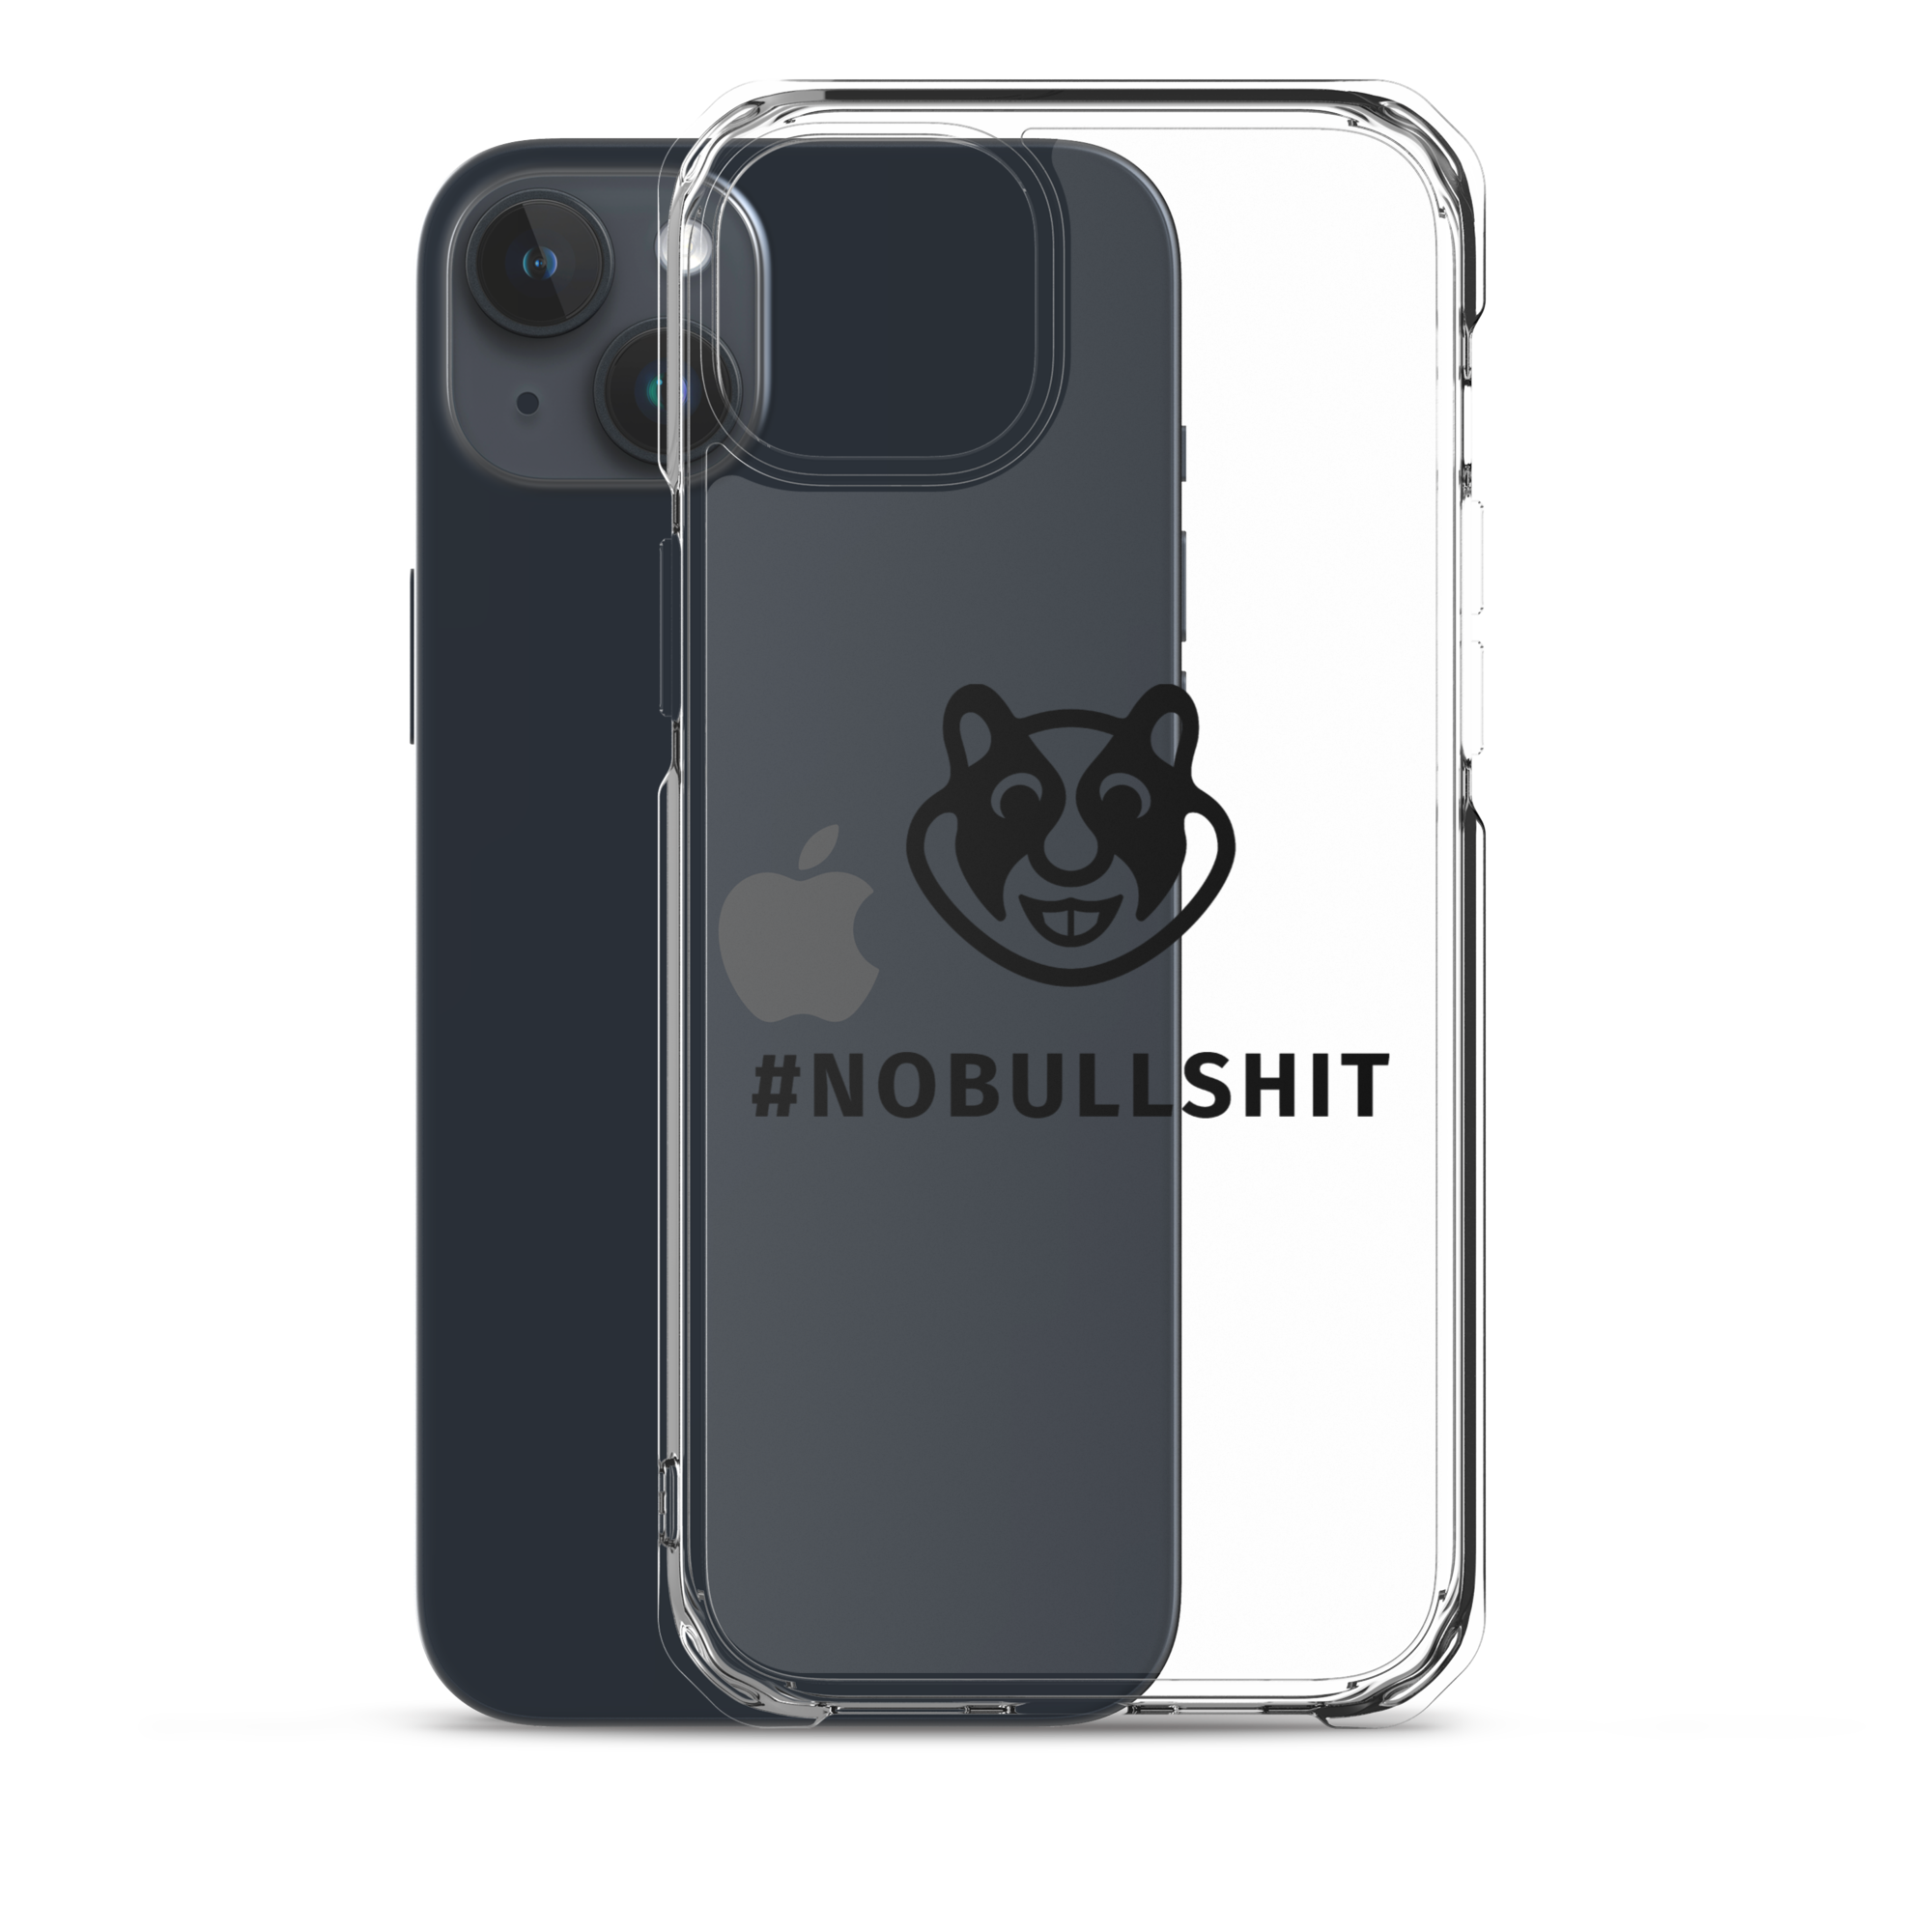 xHamster Clear Case for iPhone